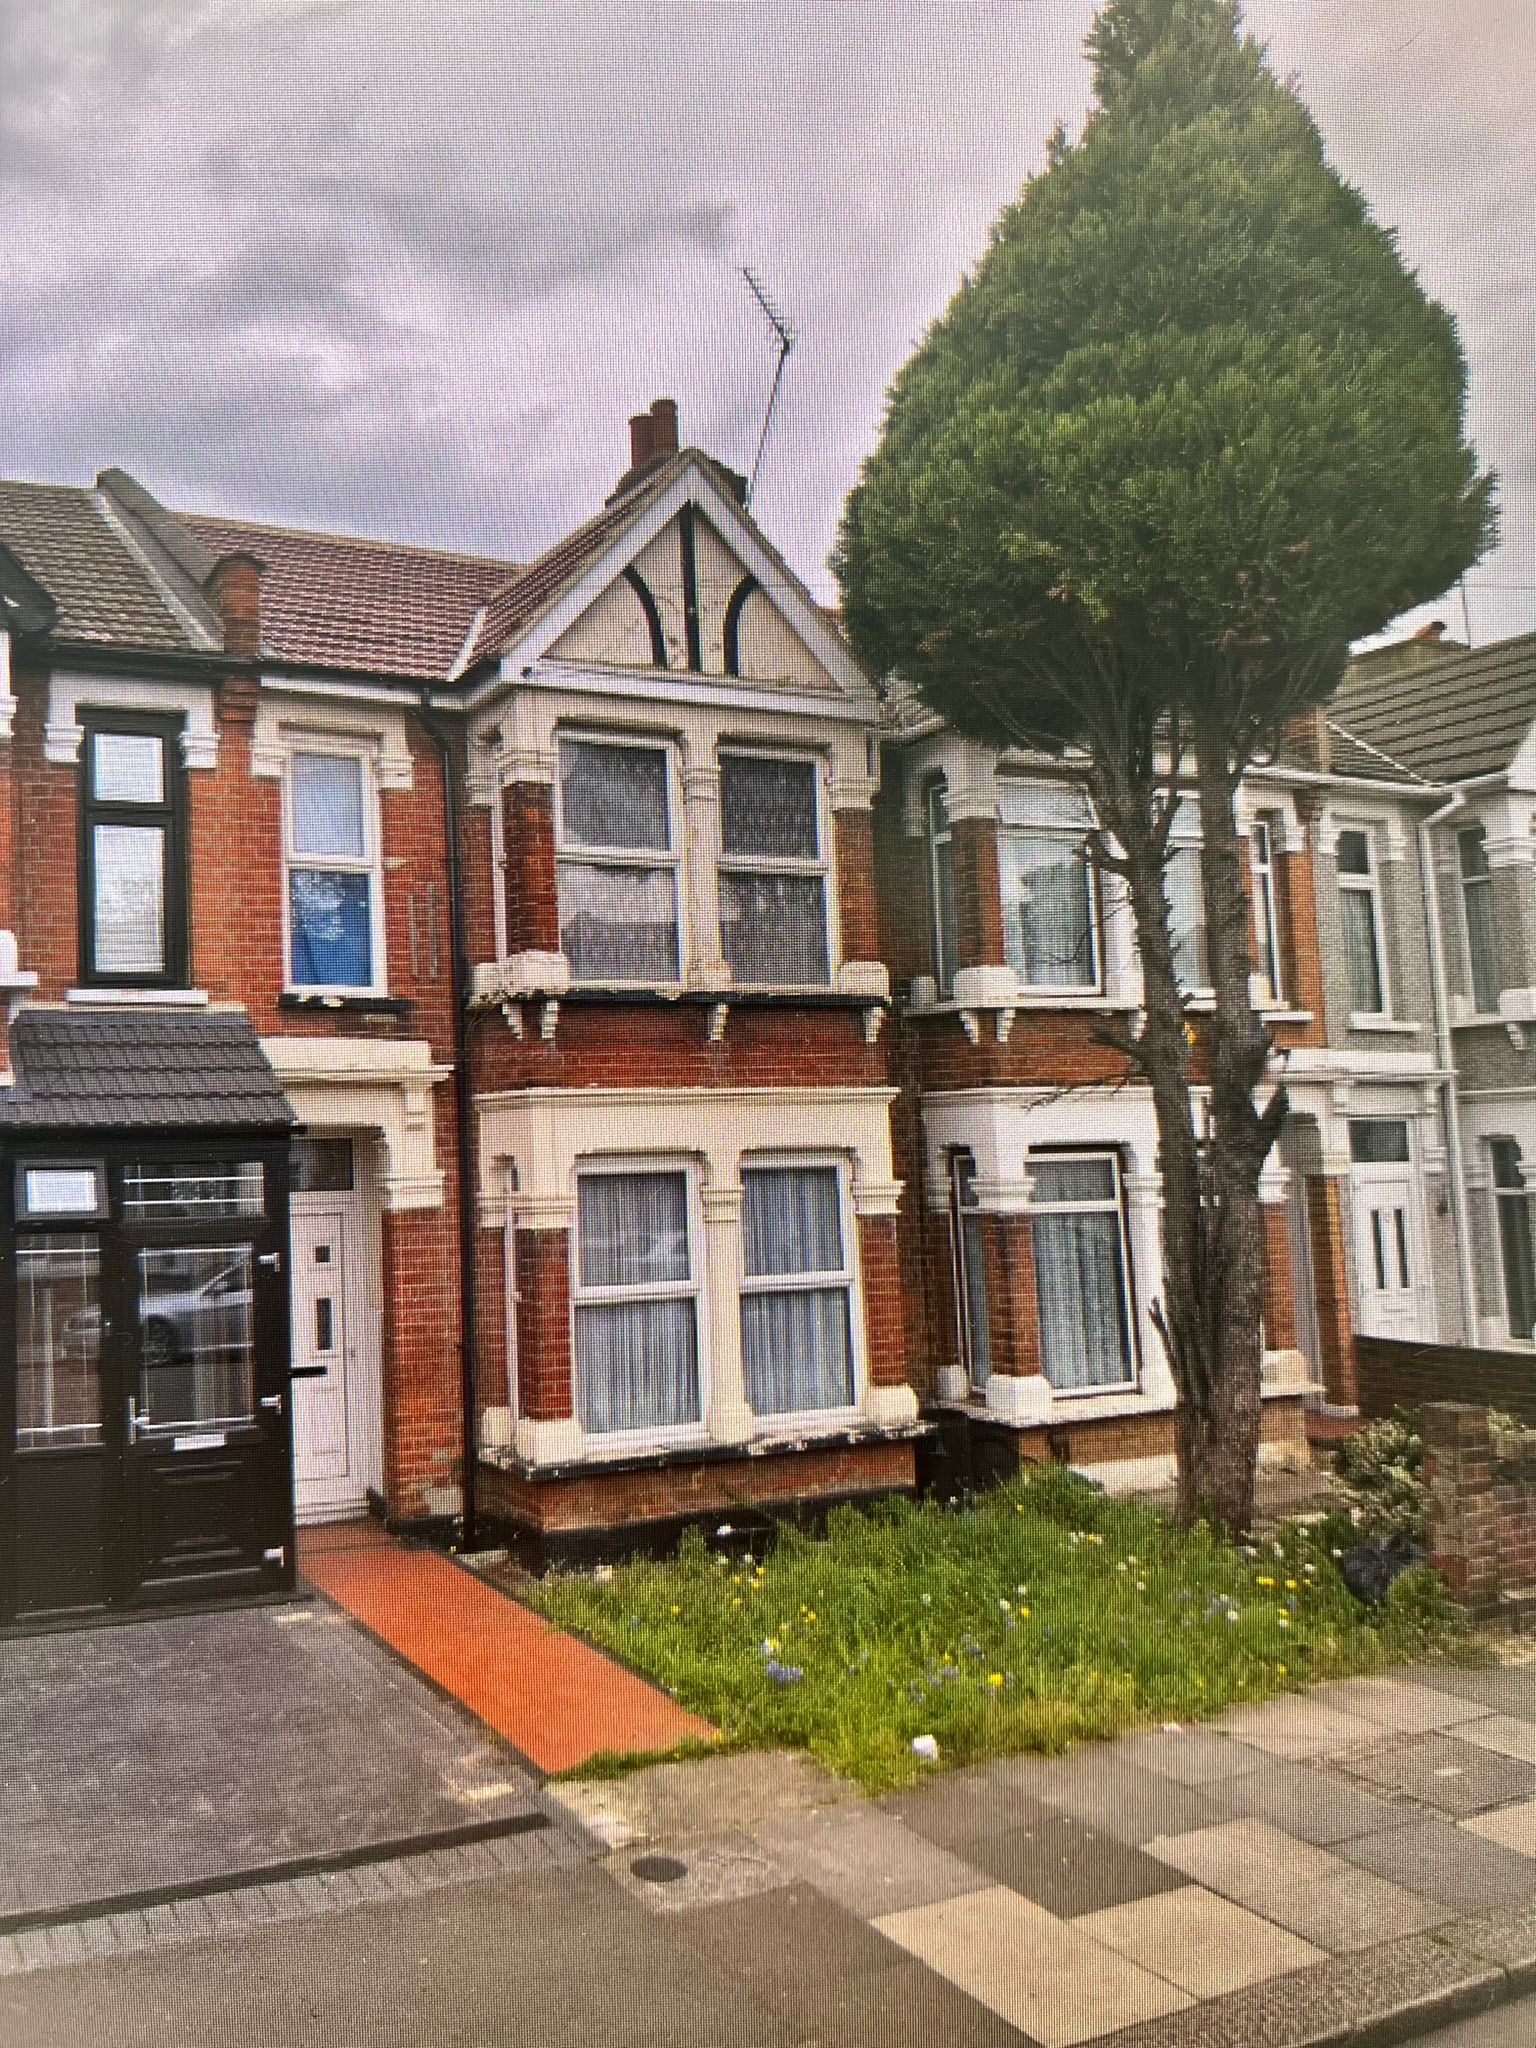 3 Bed Terraced House, Kingston Road, Ilford, IG1